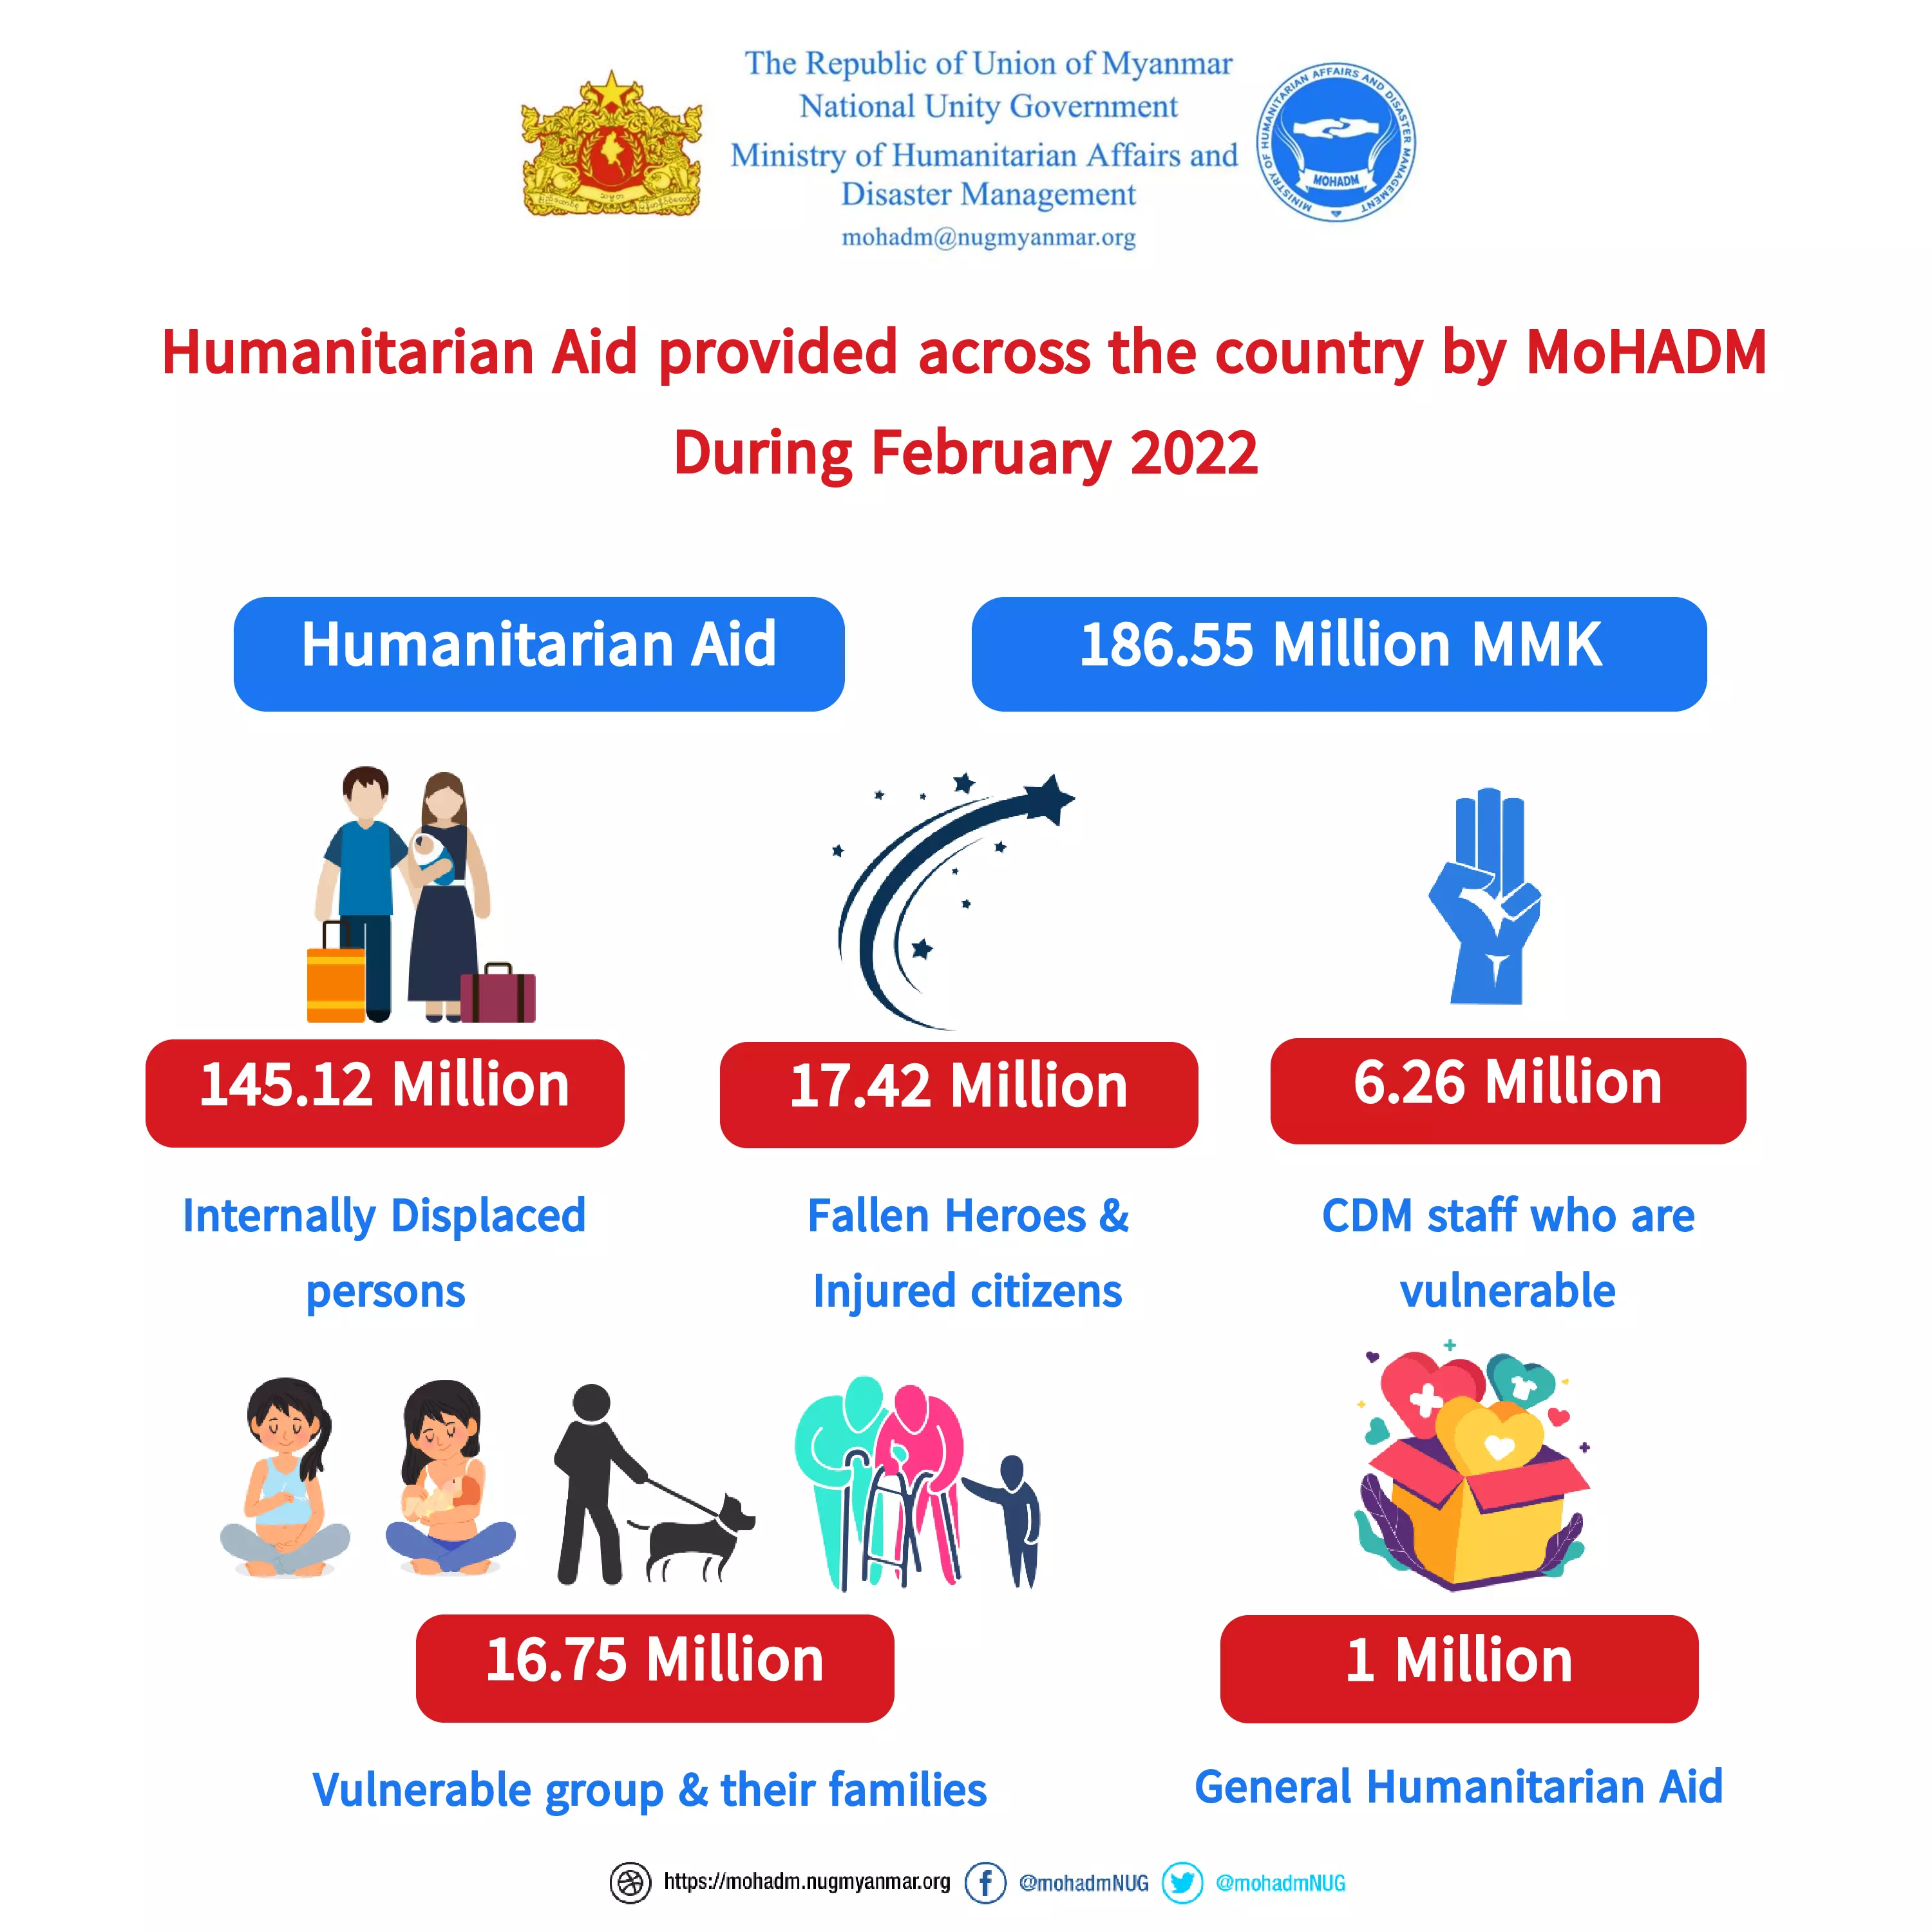 Humanitarian Aid provided across the country by during February 2022